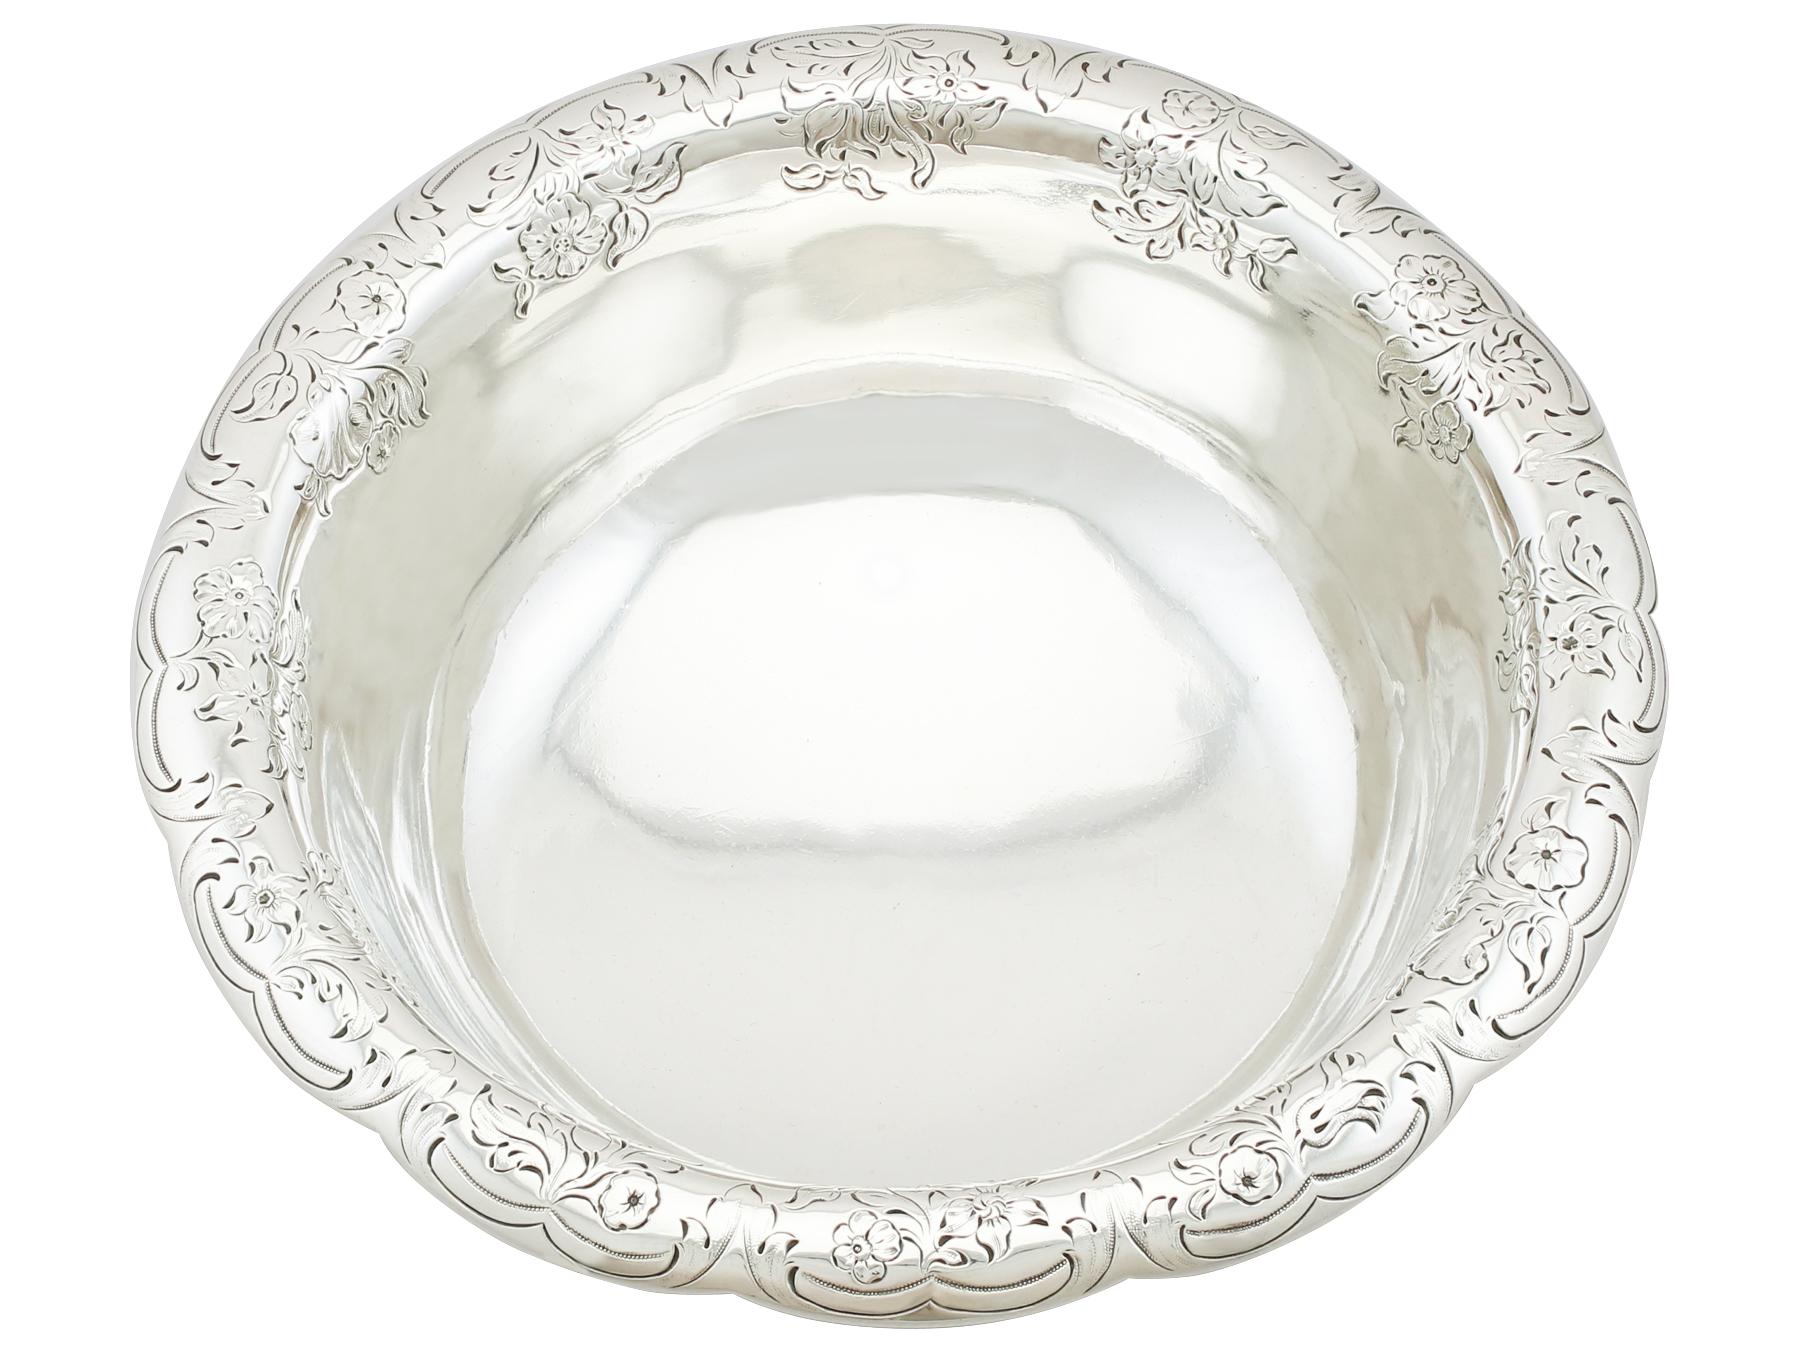 William IV Antique Sterling Silver Bowl by Paul Storr, 1834